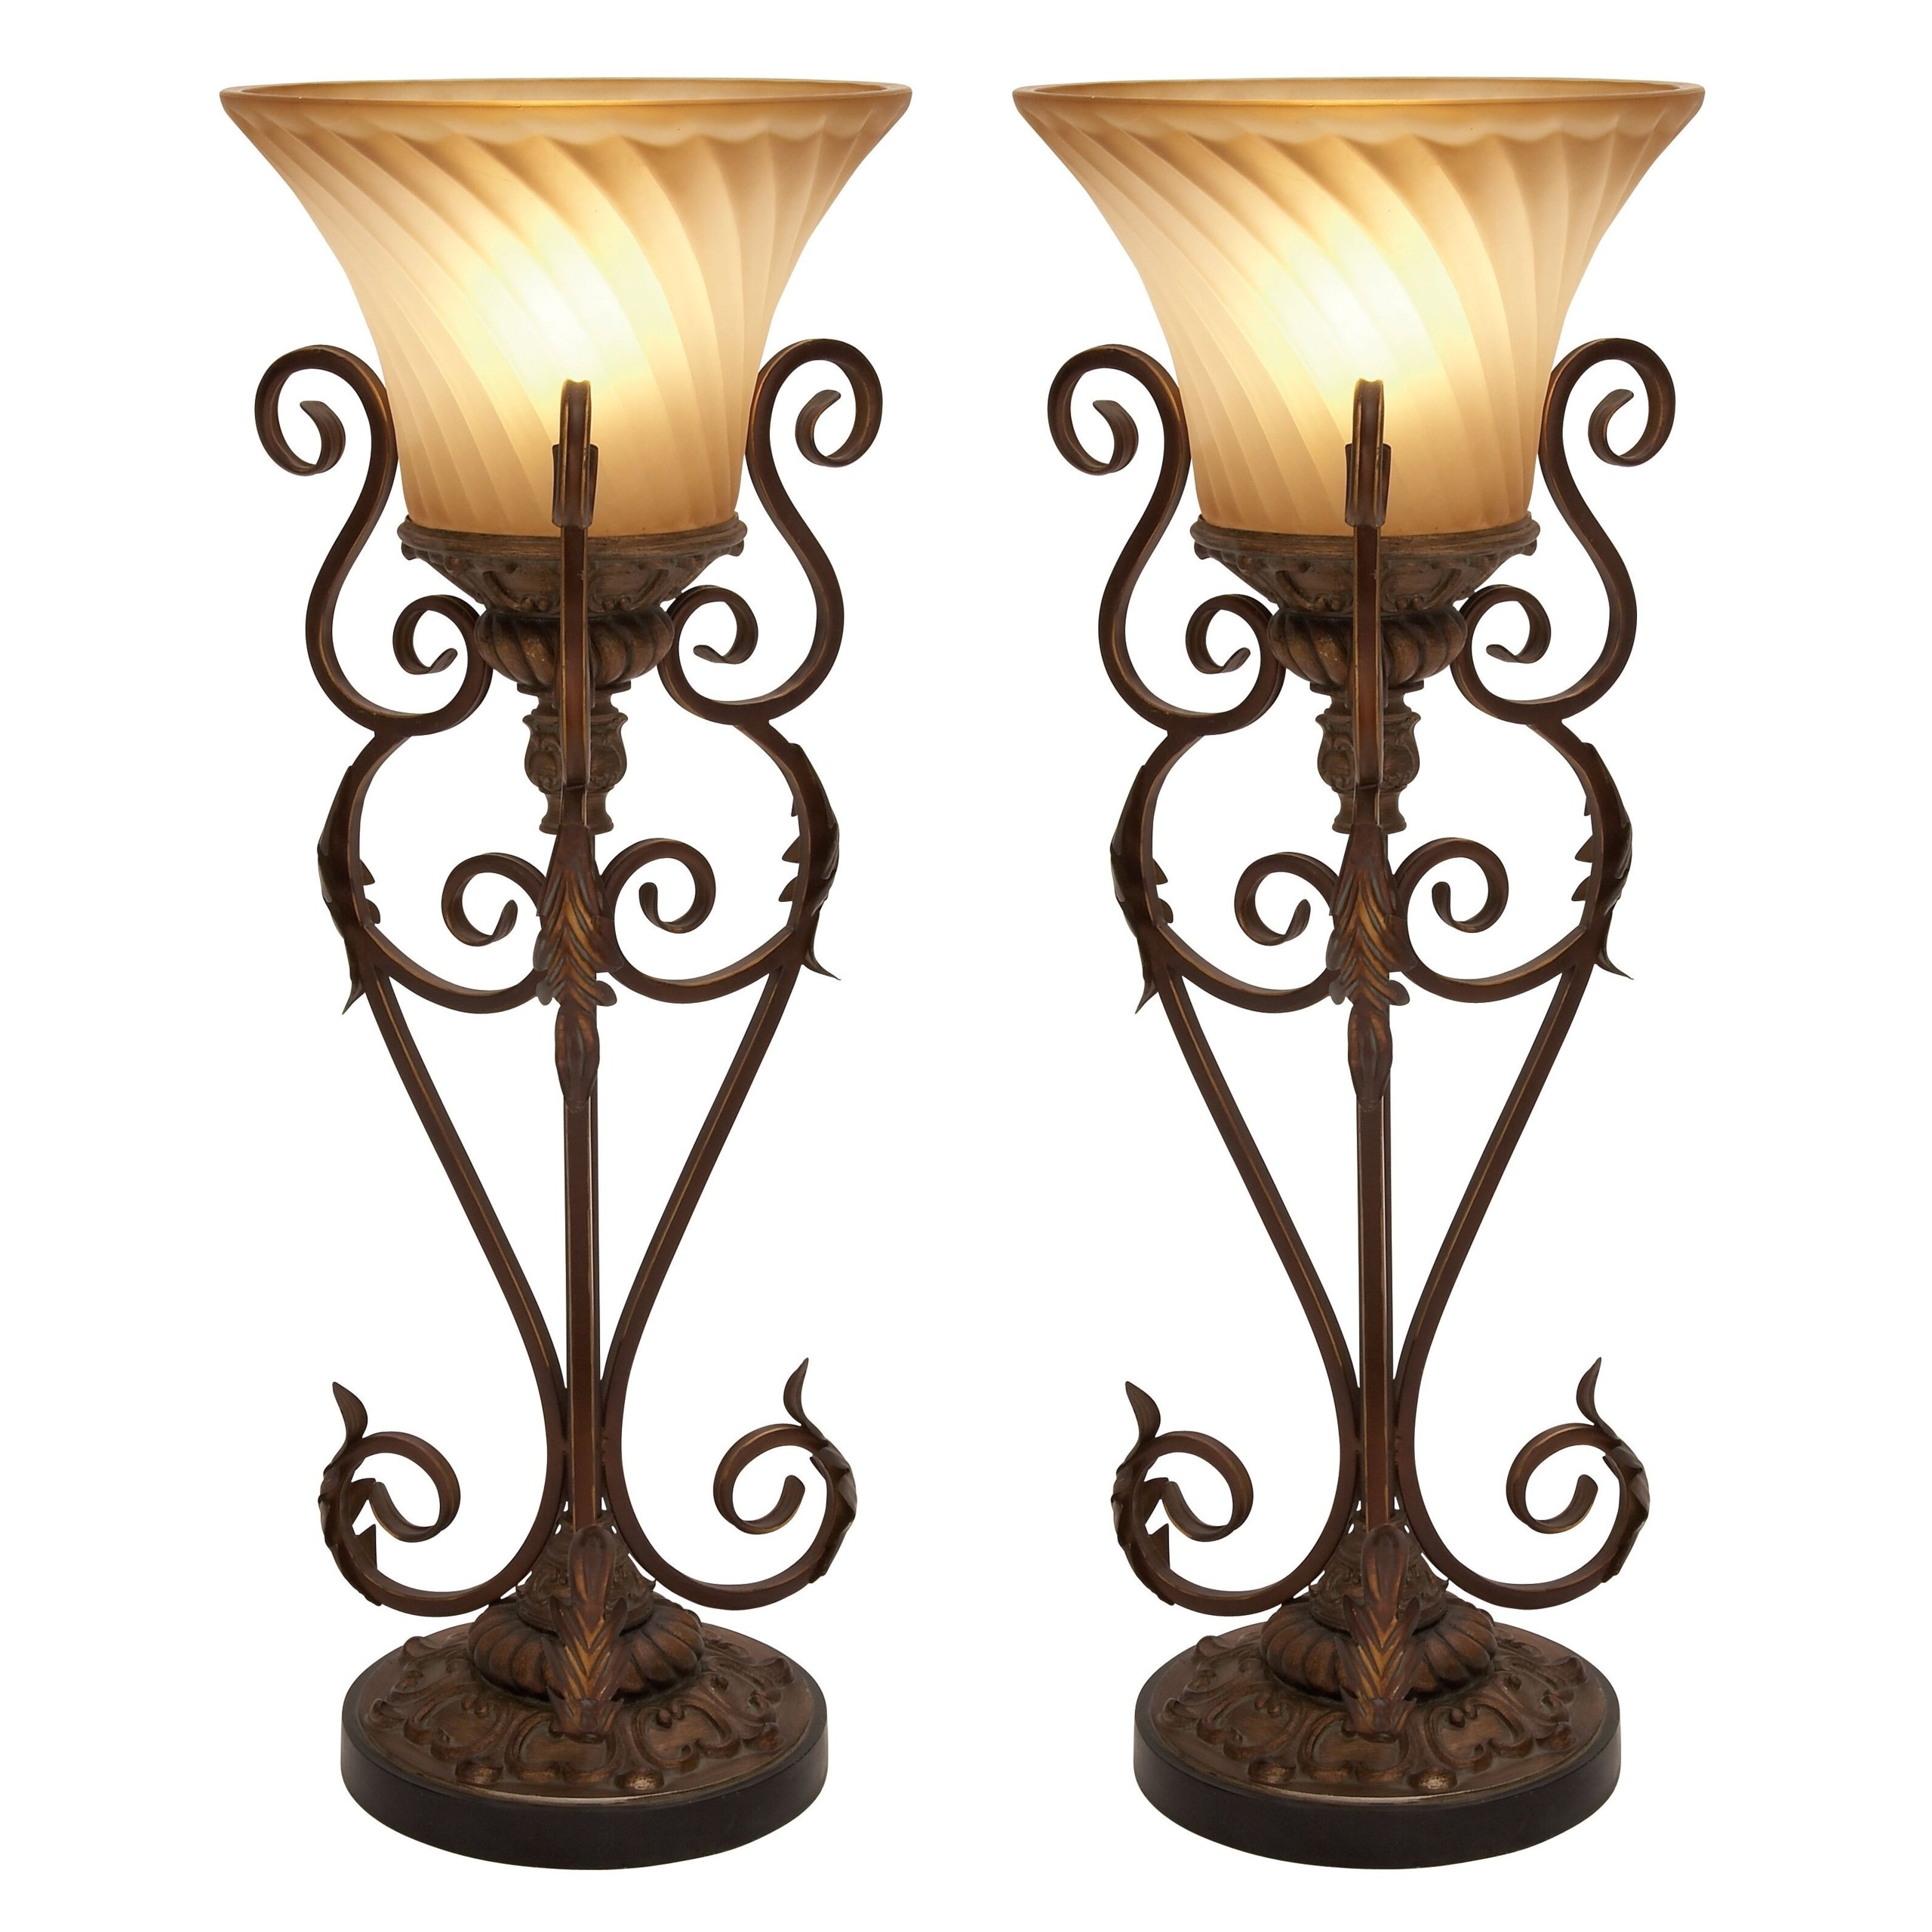 Lisette Torchiere 30" H Table Lamp with Bell Shade (Set of 2)